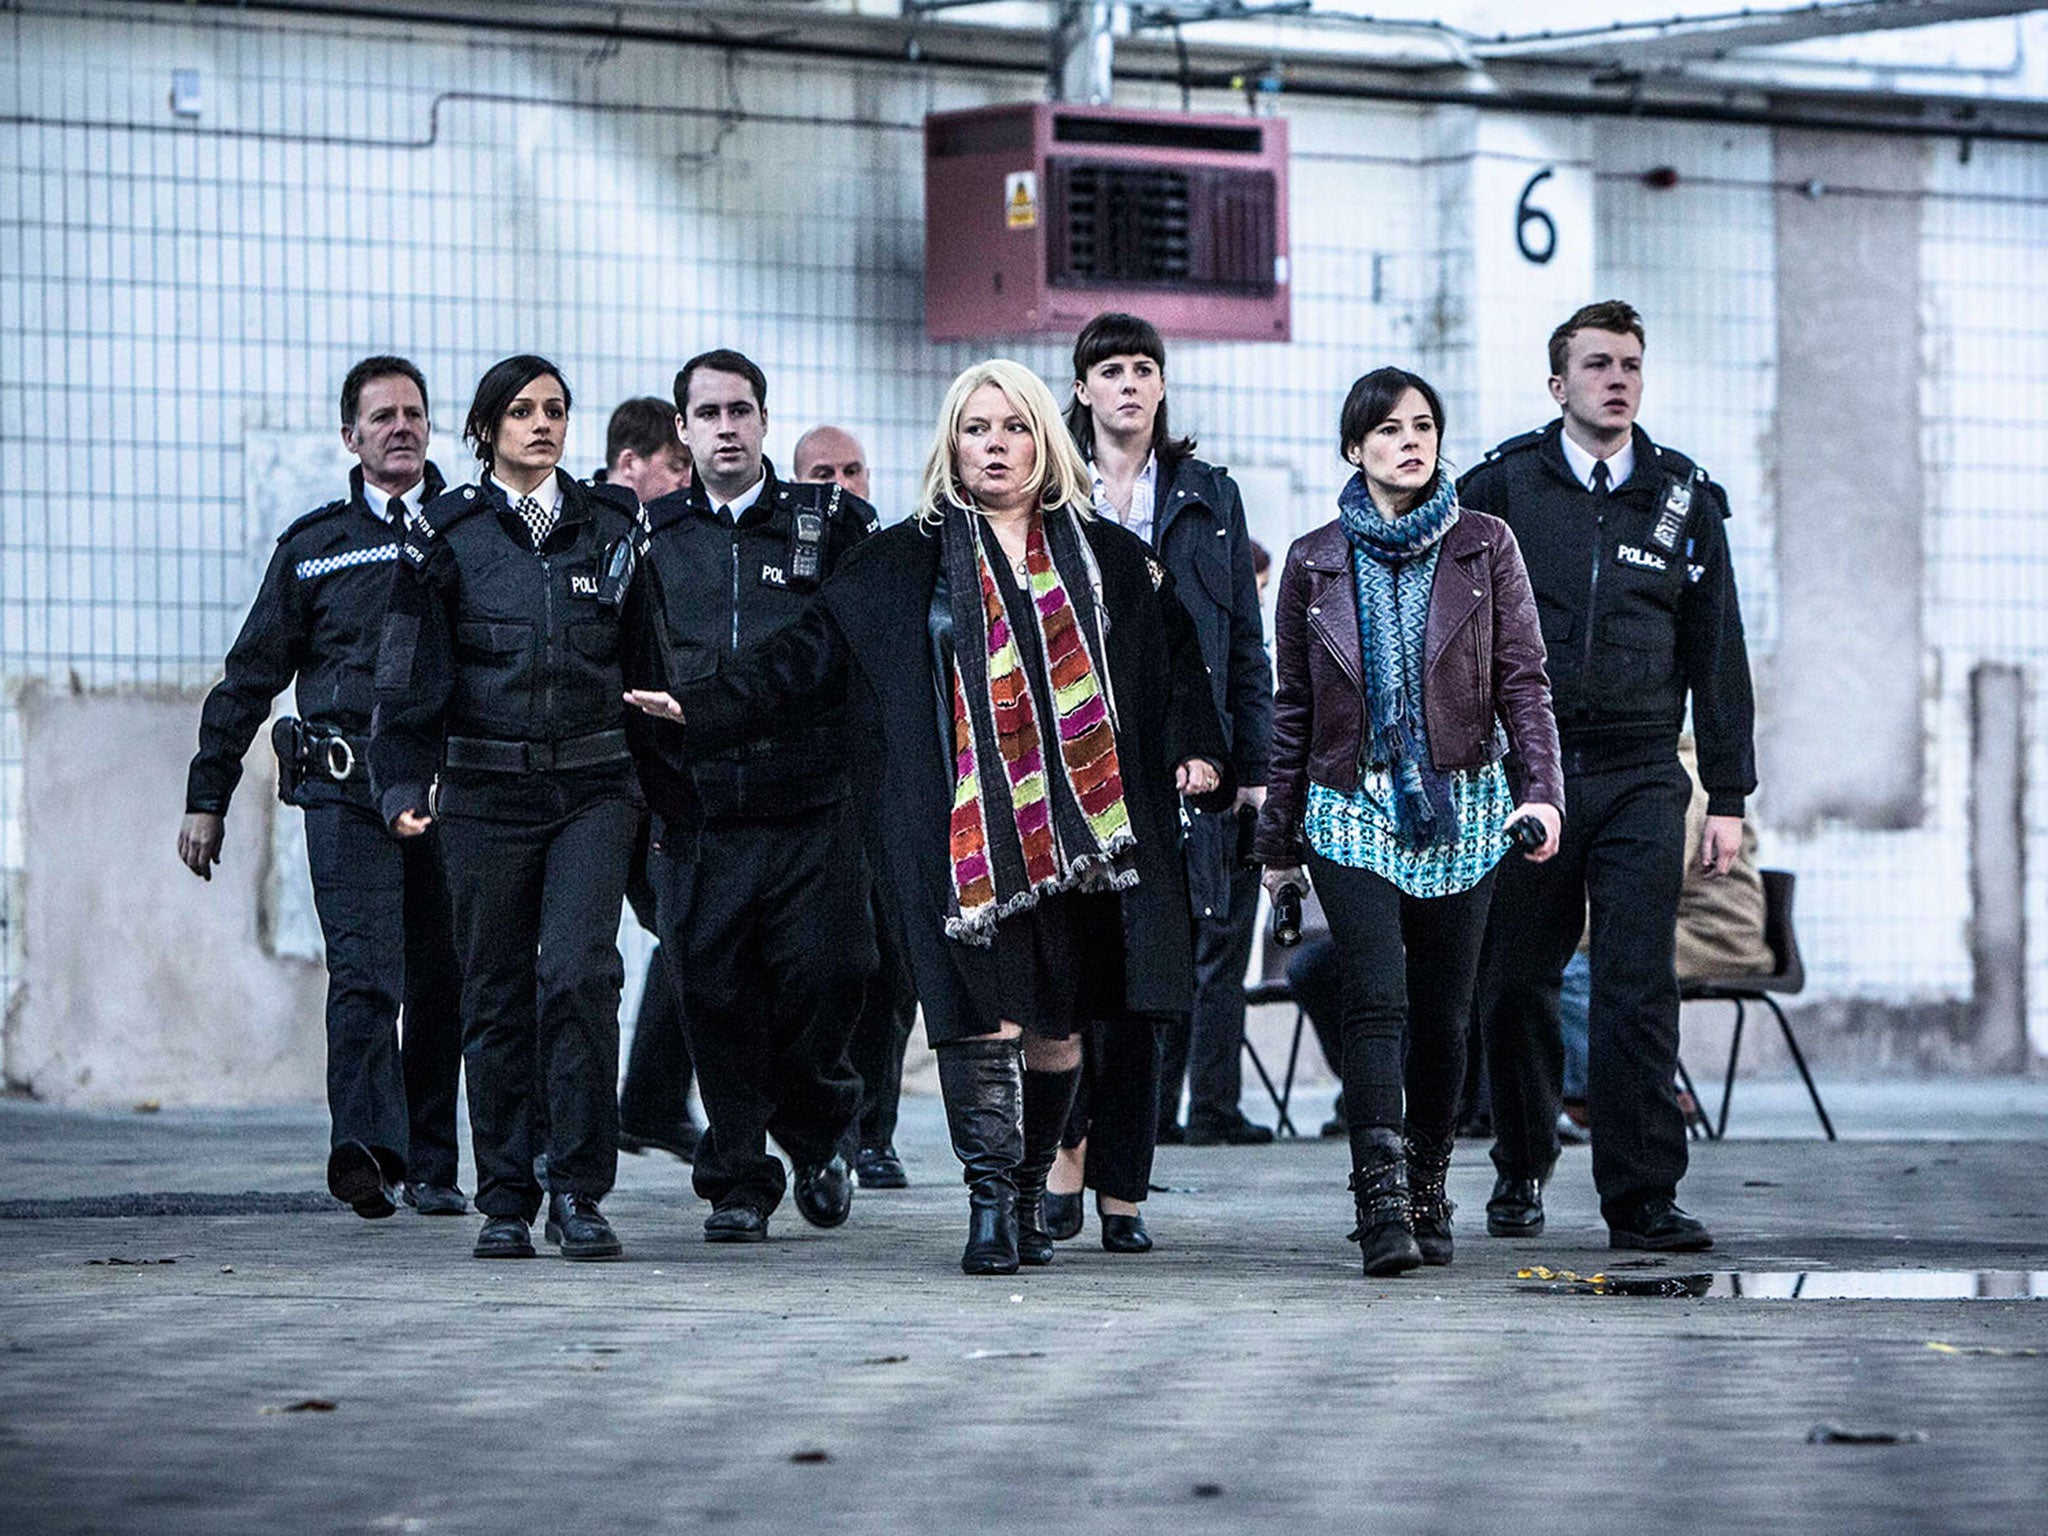 No Offence has received mixed reactions from TV critics